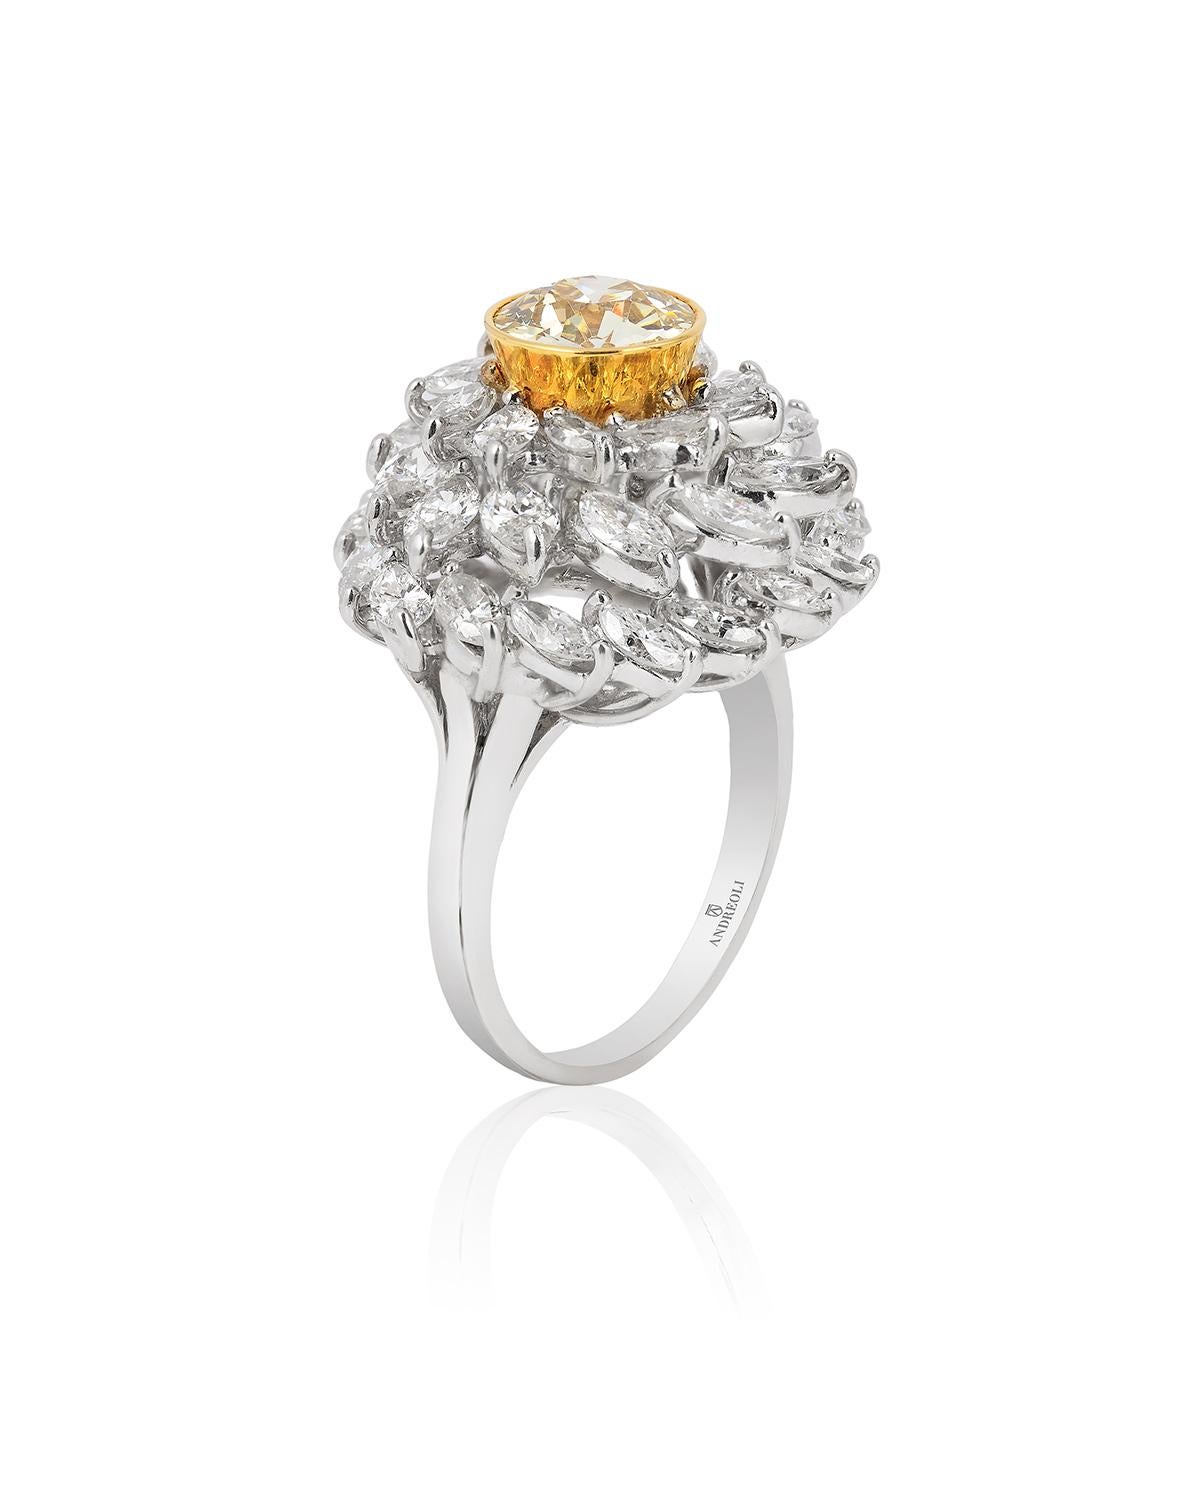 Andreoli 7.29 Carat Diamond Flower Cocktail Ring 18 Karat White Gold.

This features 7.29 carats total weight of diamonds. One round brilliant cut diamond bezel set 18 Karat Yellow Gold surrounded with marquise diamonds. (F-G-H Color, VS-SI